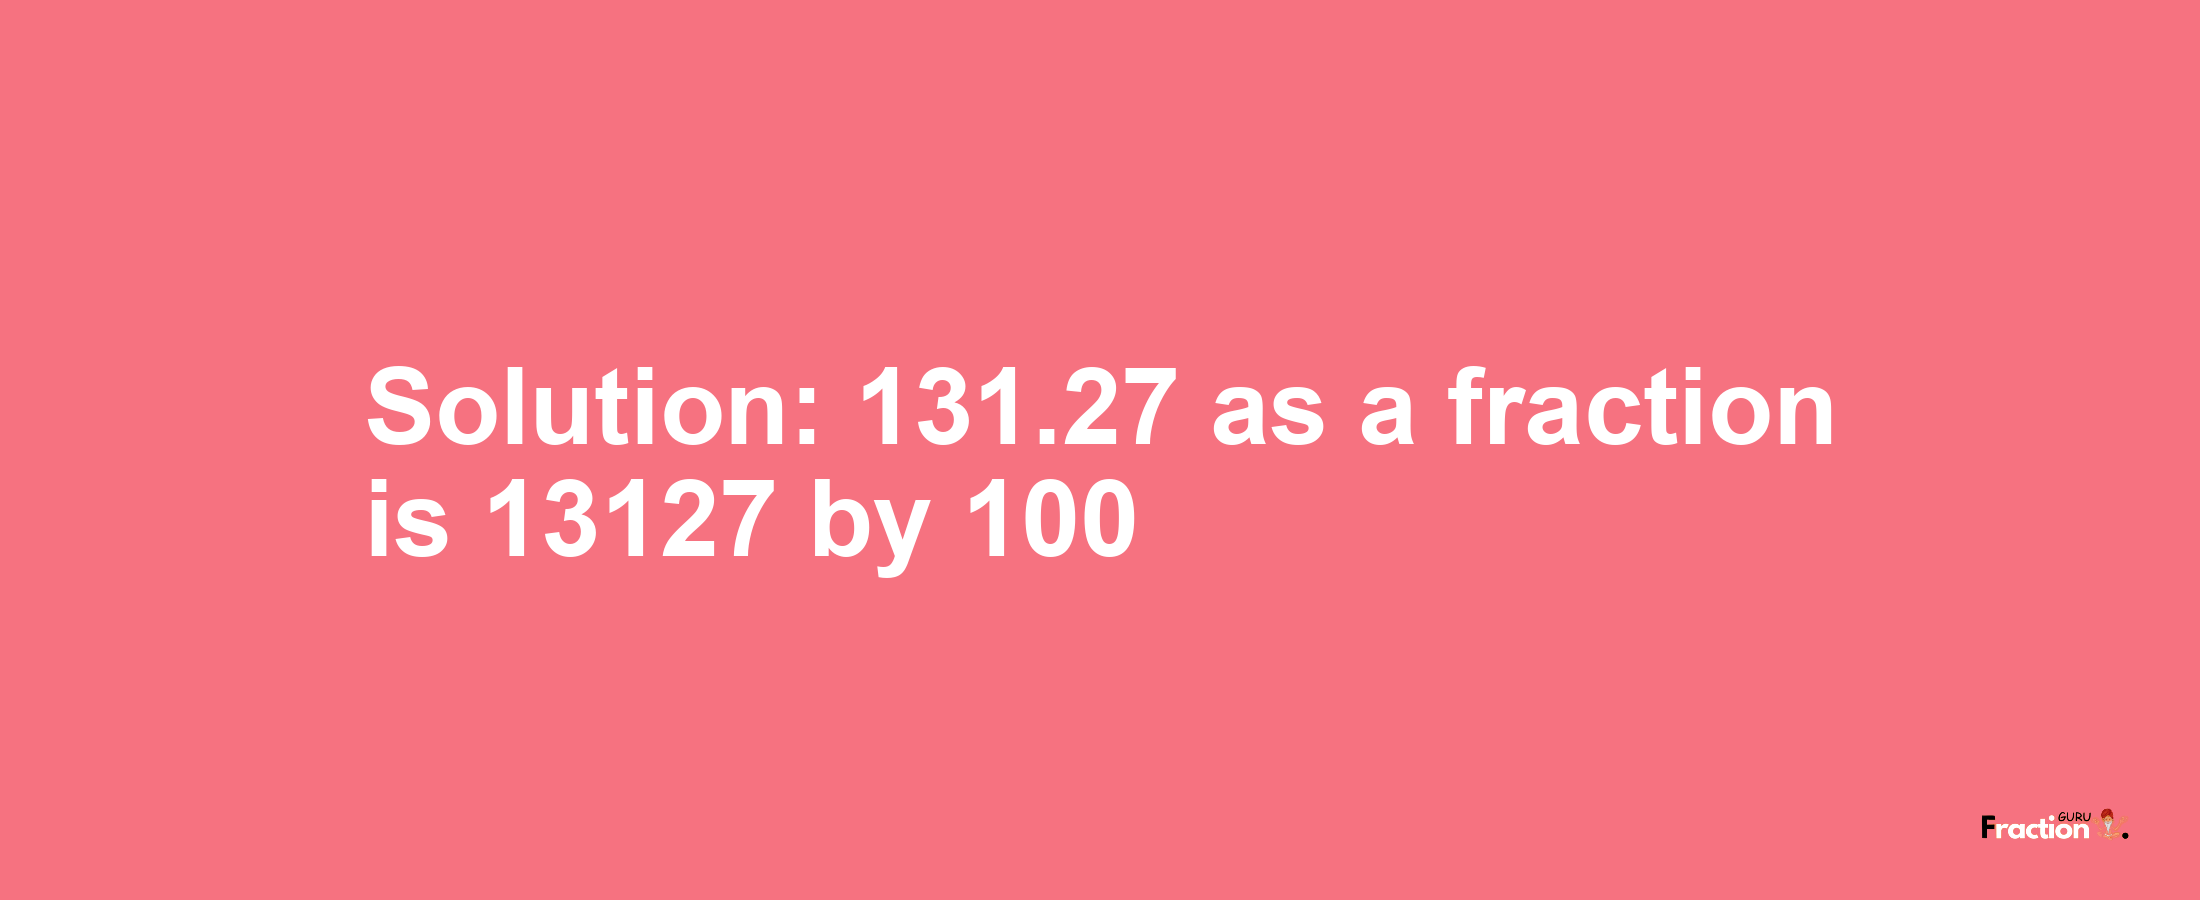 Solution:131.27 as a fraction is 13127/100